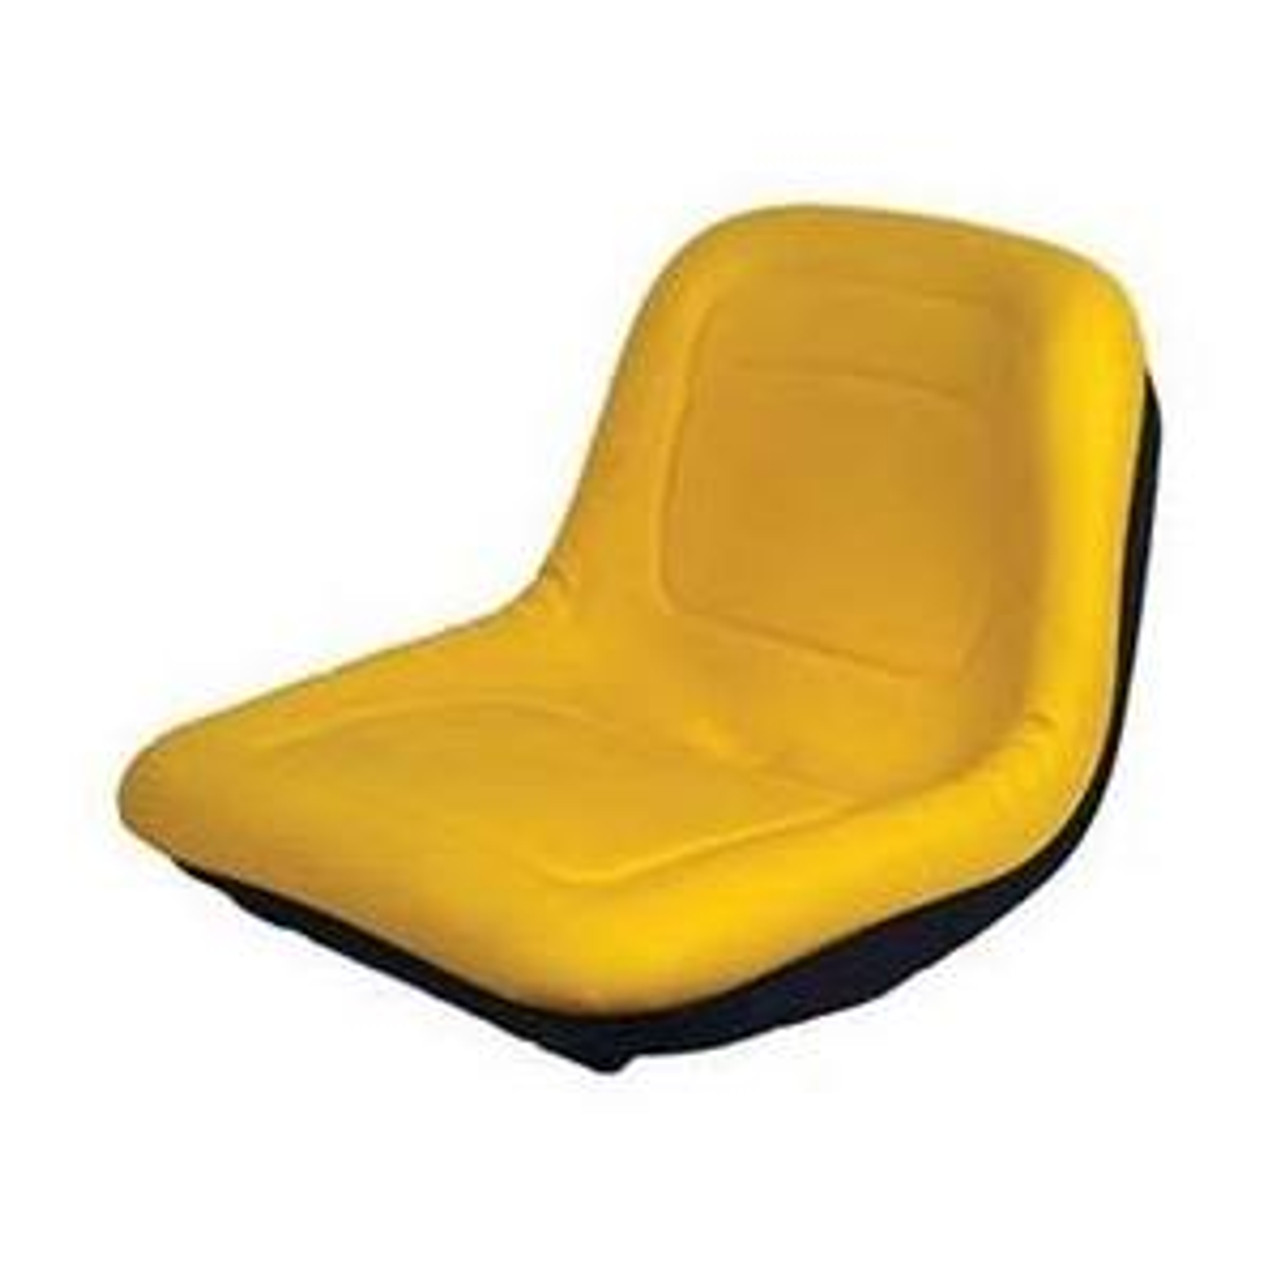 A&I Brand John Deere Seat Lawn Tractor GY20554